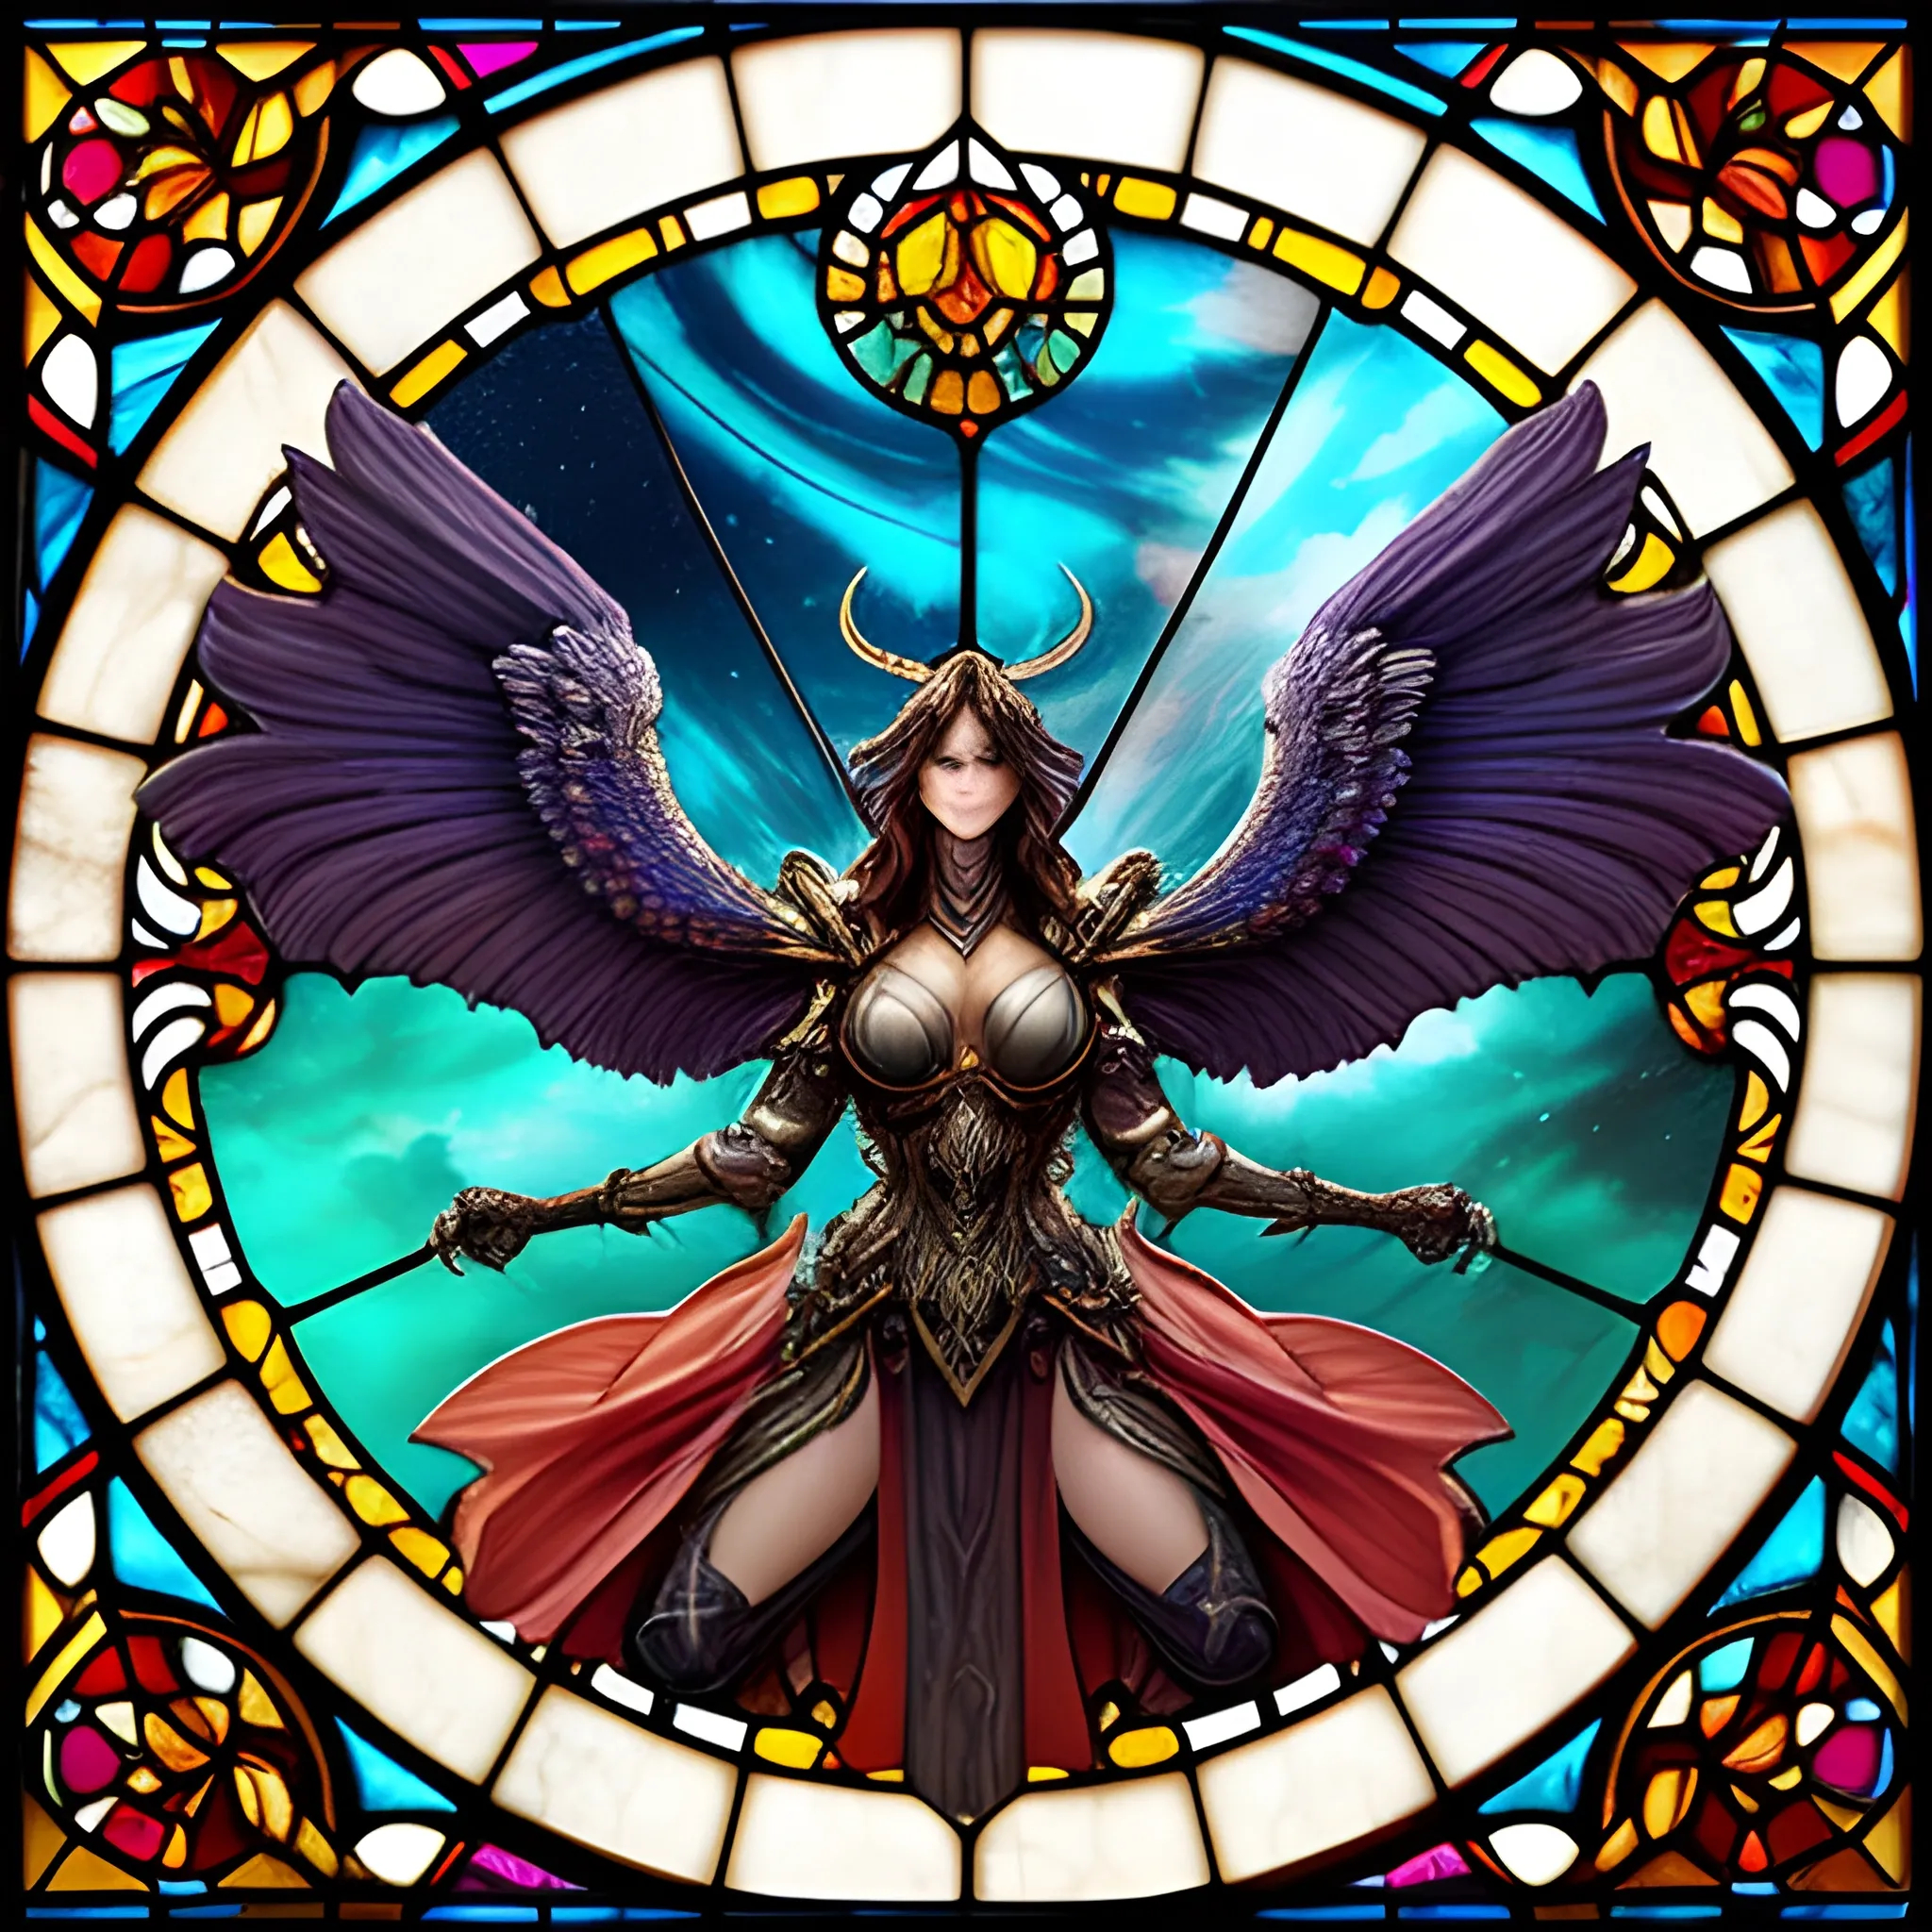 The image showcases a traditional stained glass window depicting an epic battle between an angel and a demon. The angel is portrayed with majestic, feathered wings and a halo, symbolizing purity and divinity. In contrast, the demon is characterized by dark, bat-like wings and a menacing stance, representing darkness and malevolence. They are engaged in a dramatic sword fight, at the center of which is a bright burst of light, possibly indicating the clashing of their weapons.The stained glass window is intricately detailed, with a rich palette of colors. The upper portion of the window displays symmetrical designs with a variety of vibrant colors that resemble flames, suggesting the intensity of the heavenly battle. Below the figures, the chaos of battle continues with a depiction of numerous human figures engaged in their own struggle, adding to the scene's dynamic nature.The overall composition is symmetrical and balanced, with the angel and demon positioned as mirror images of each other, reinforcing the theme of the eternal struggle between good and evil. The background of the window is a complex array of cloud-like formations, providing a sense of depth and movement to the celestial scene above.The lower part of the window serves as a narrative foundation, grounding the heavenly conflict in the mortal realm, perhaps implying that the outcomes of such cosmic battles have direct consequences on the human condition. The craftsmanship of the stained glass, with its leaded divisions and varying textures and hues, contributes to a sense of grandeur and historical significance. extremely psychedelic macro, dof, lsd, microscopic, diffuse lighting, fantasy, intricate, elegant, highly detailed, organic, photorealistic, digital painting, artstation, illustration, concept art, smooth, sharp focus, art by john collier and albert aublet and krenz cushart and artem demura and mucha, 3D